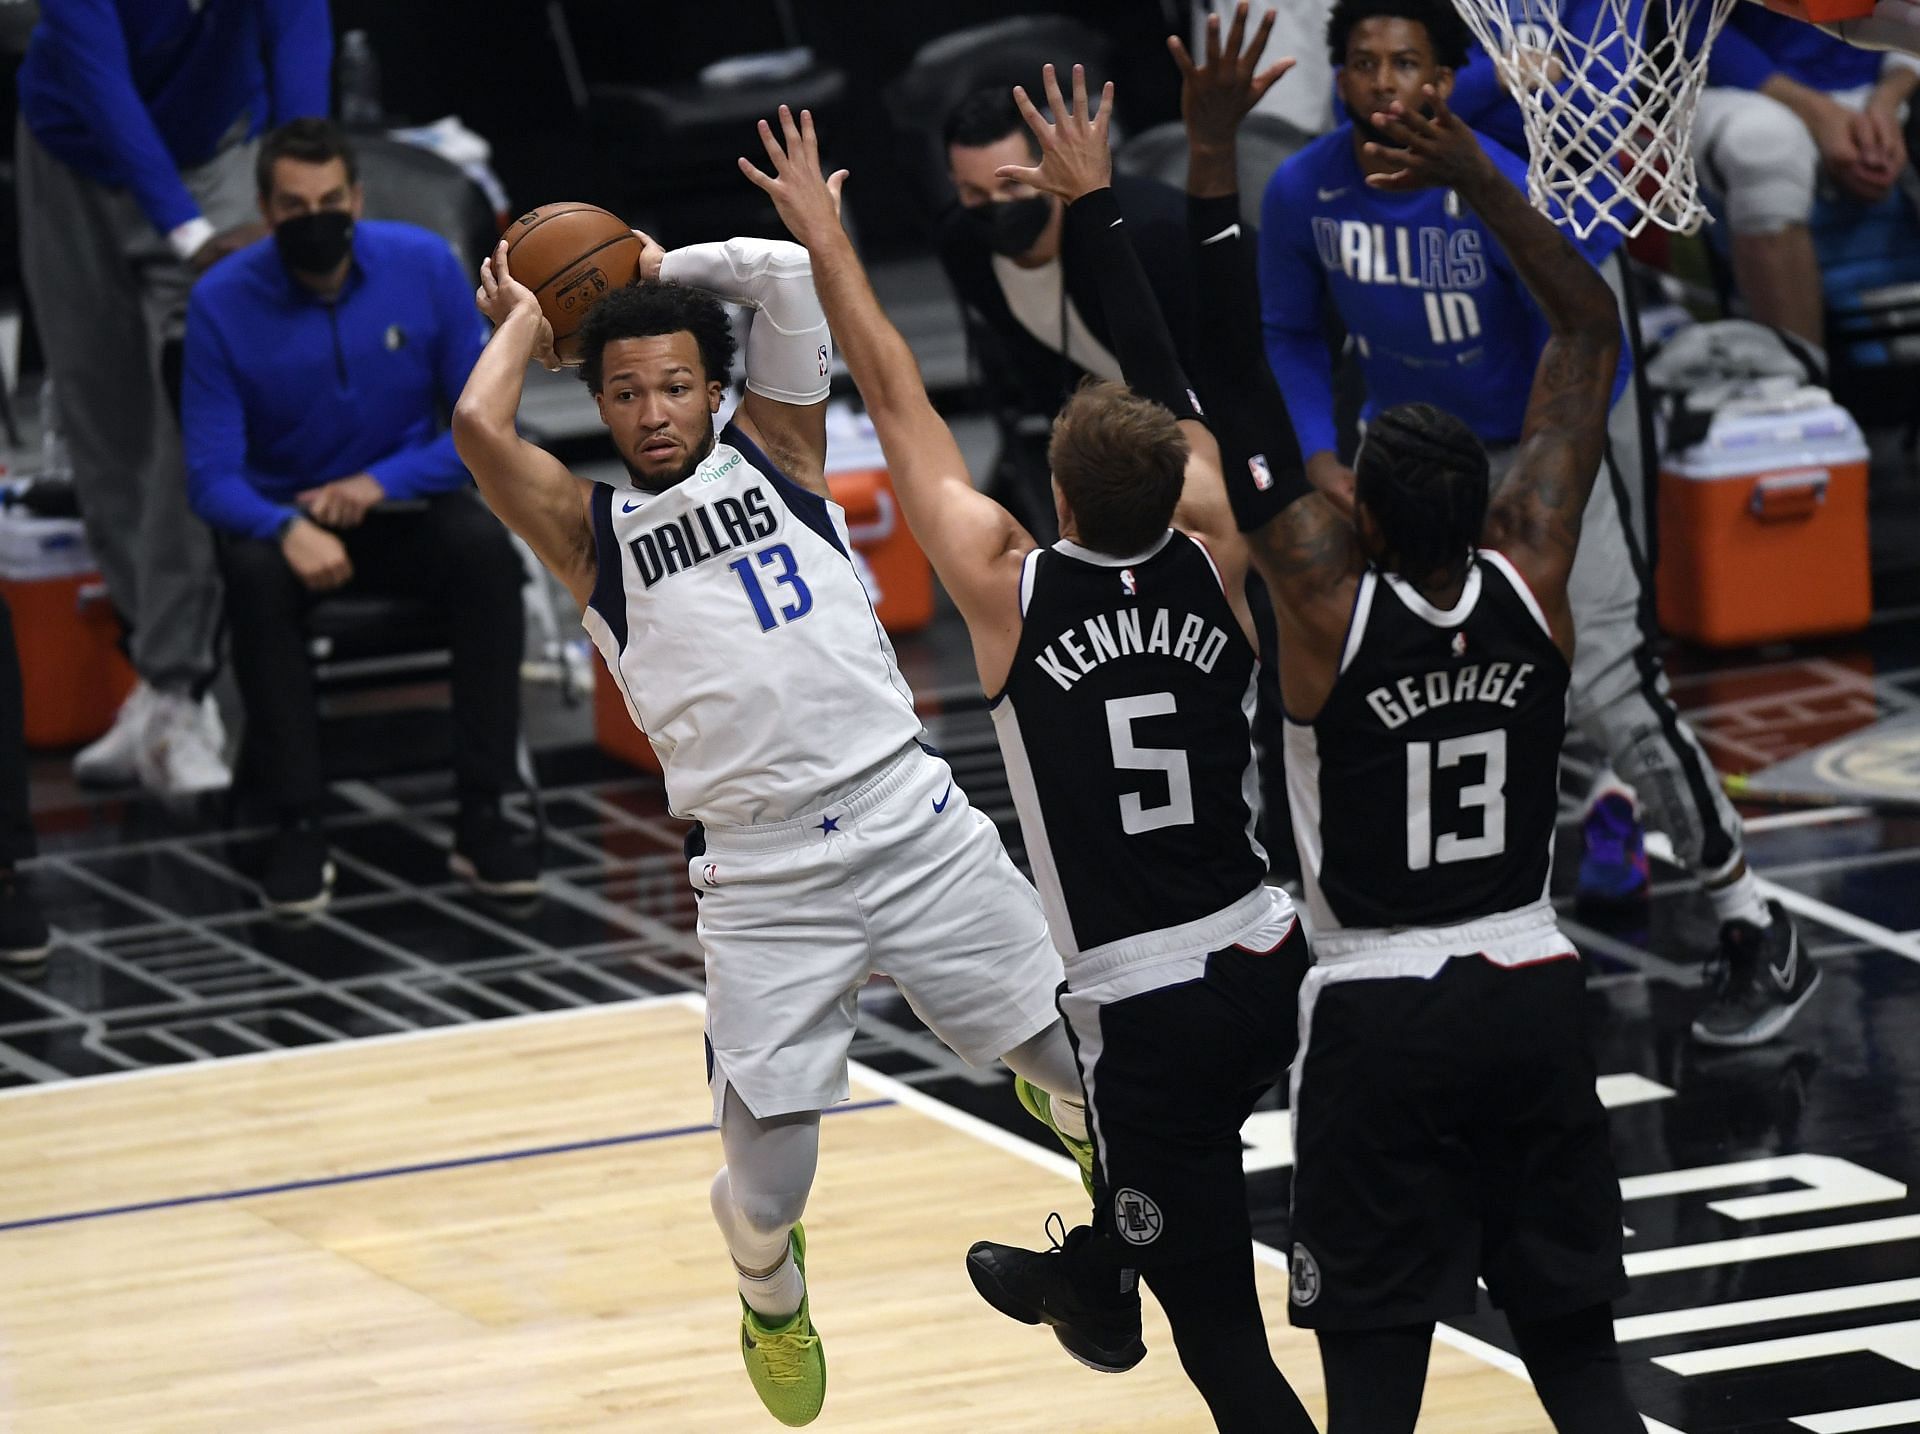 Jalen Brunson #13 of the Dallas Mavericks passes the ball against Luke Kennard #5 and Paul George #13 of the Los Angeles Clippers during the first half of Game Seven of the Western Conference first round series at Staples Center on June 6, 2021 in Los Angeles, California.